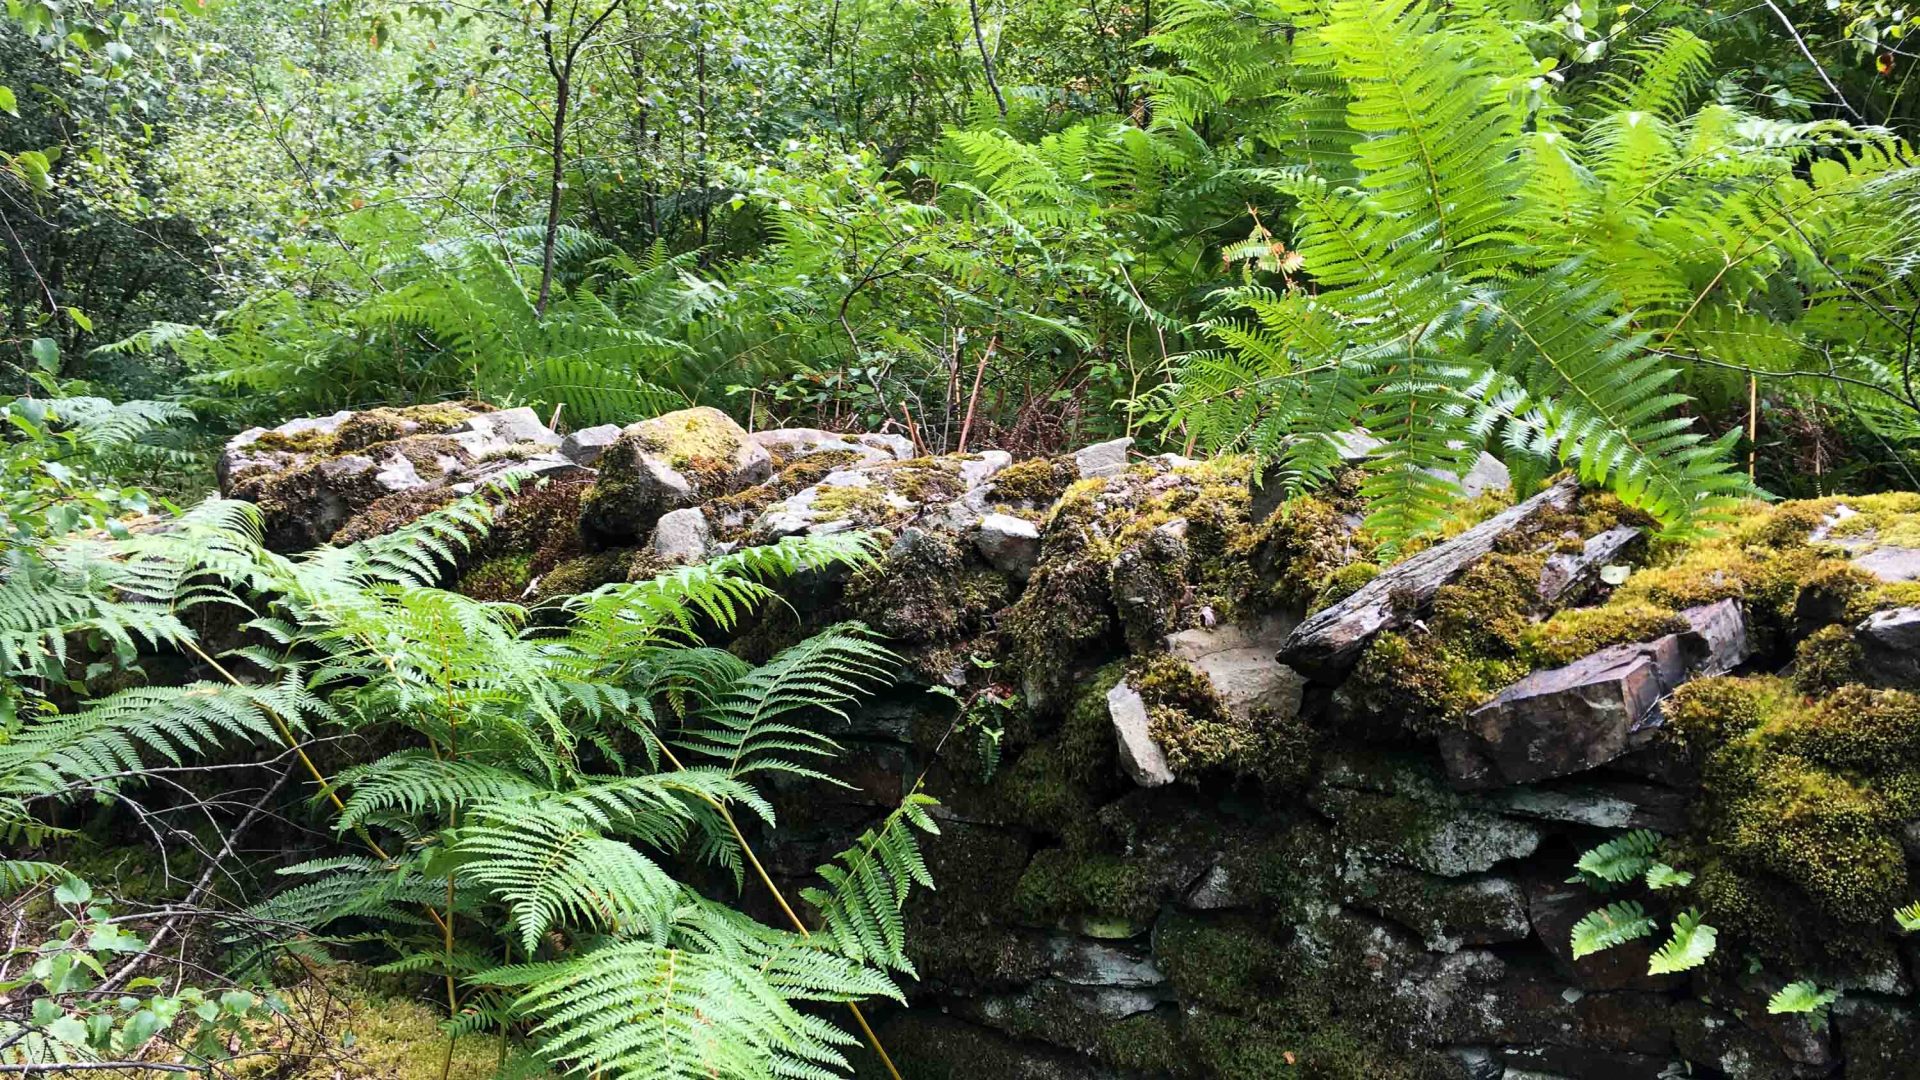 A stone wall and ferns.